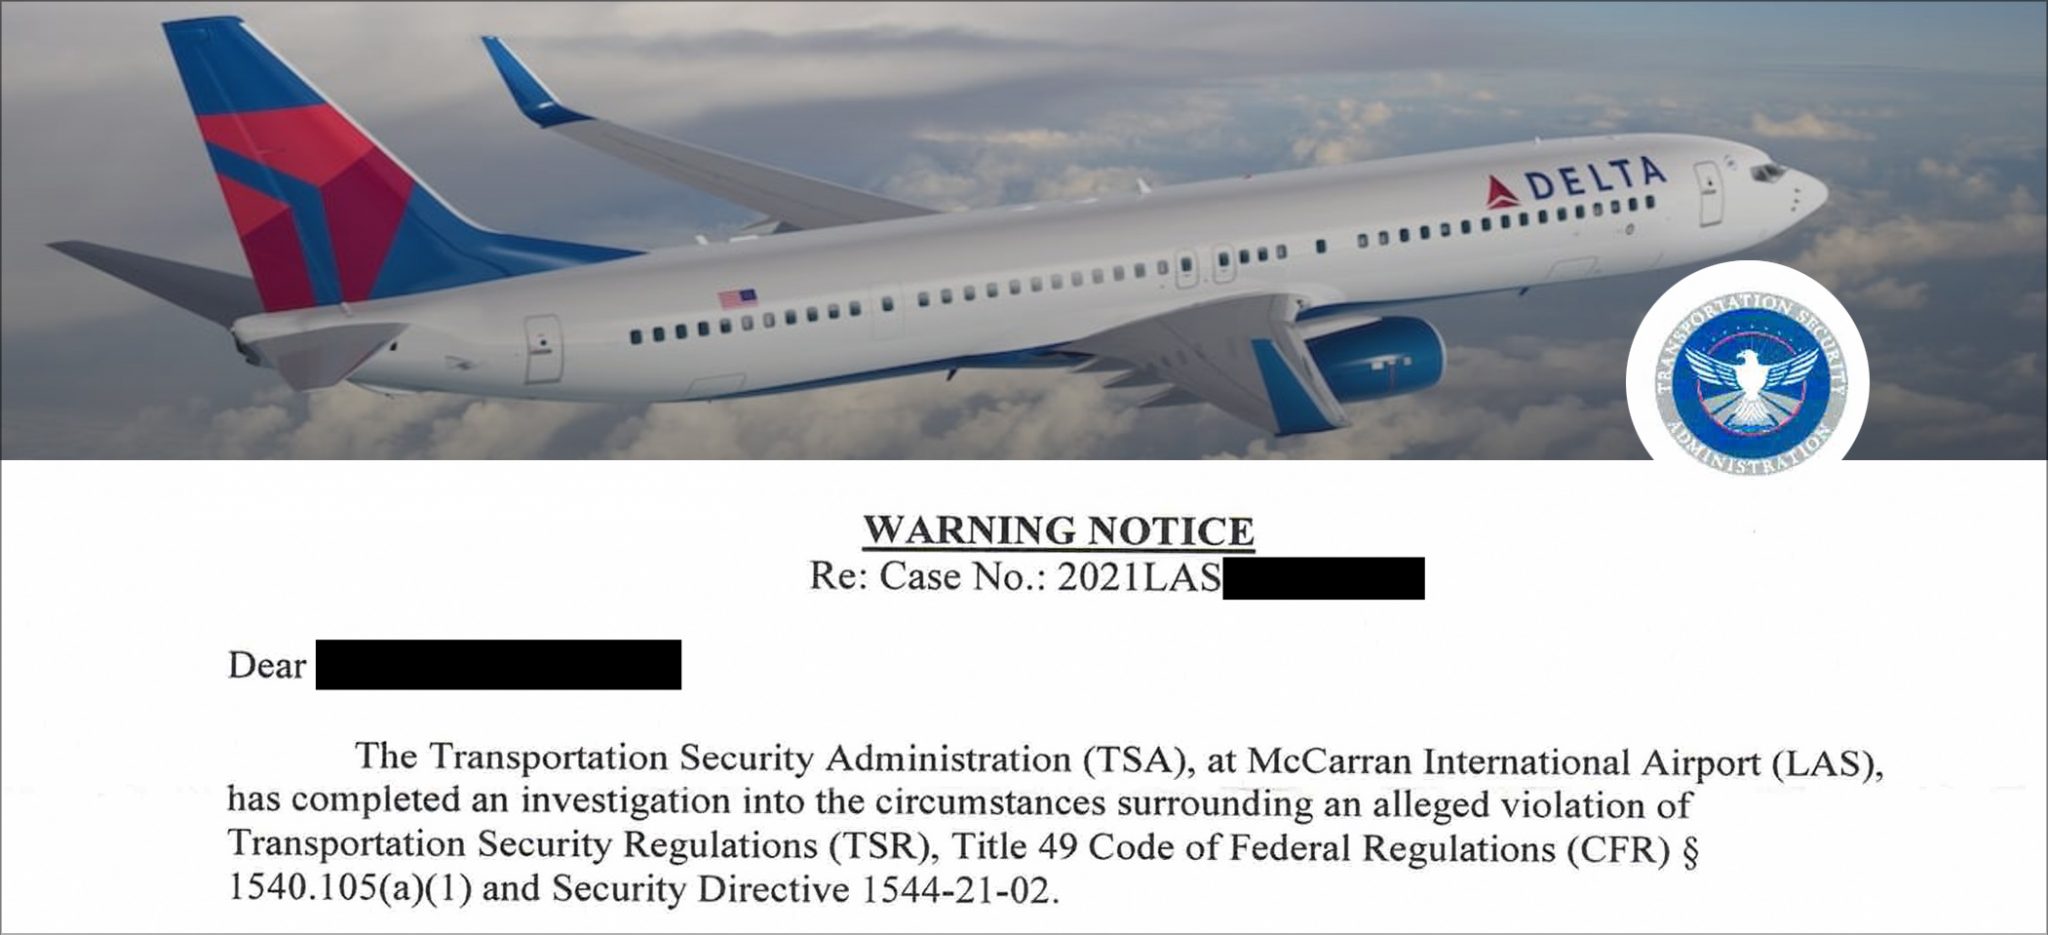  EXCLUSIVE: Delta Airlines and TSA Target & Intimidate a Passenger Without Cause